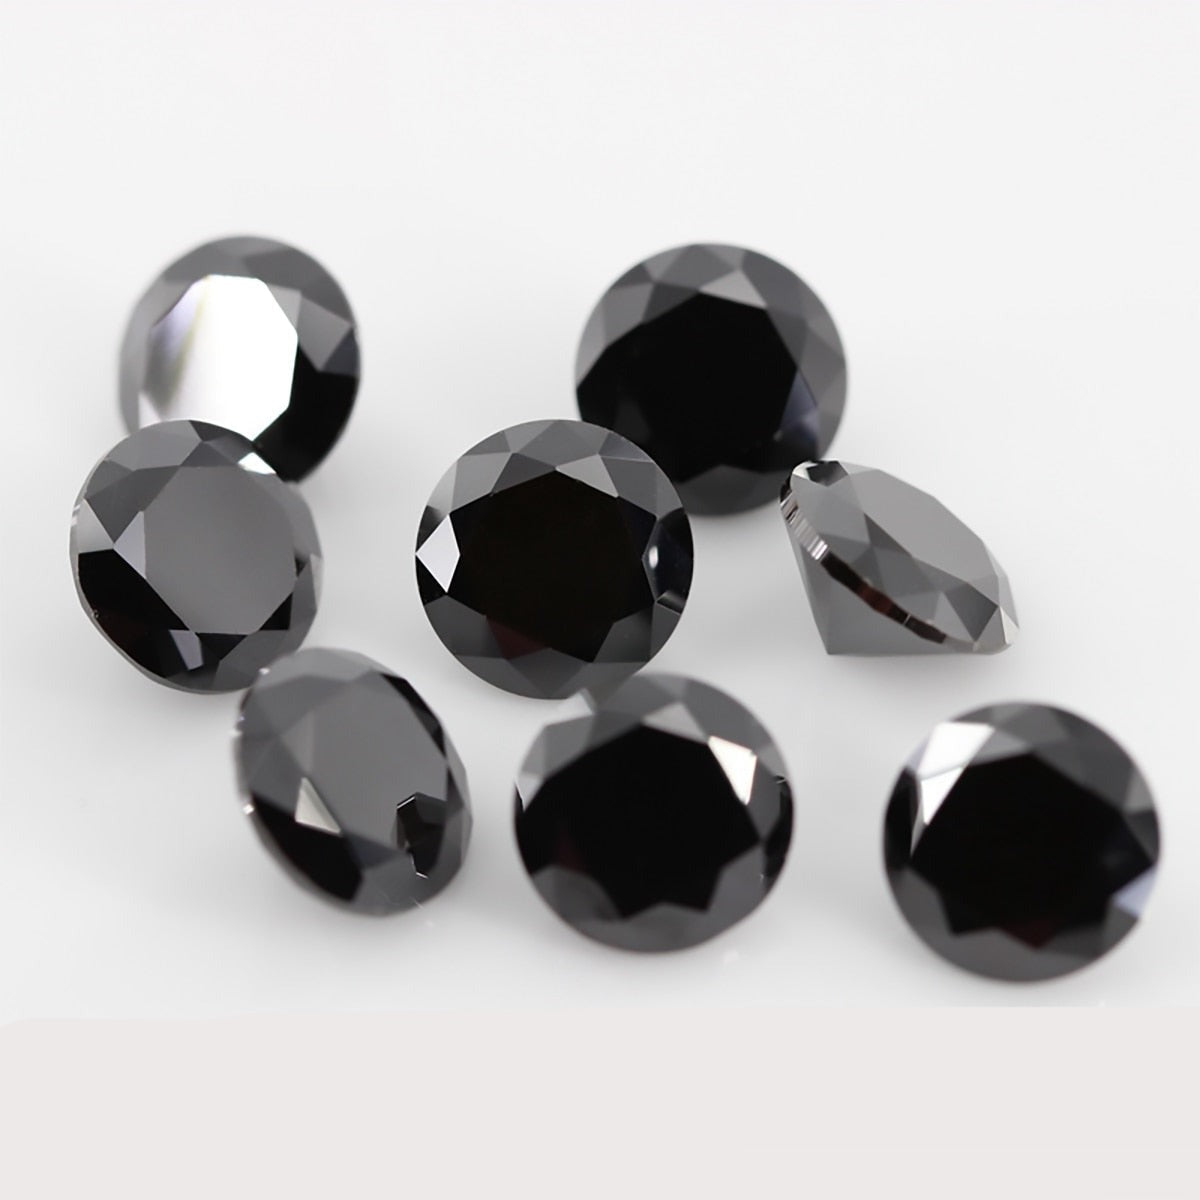 Small Size Black Moissanite Gemstones 0.8mm to 3mm